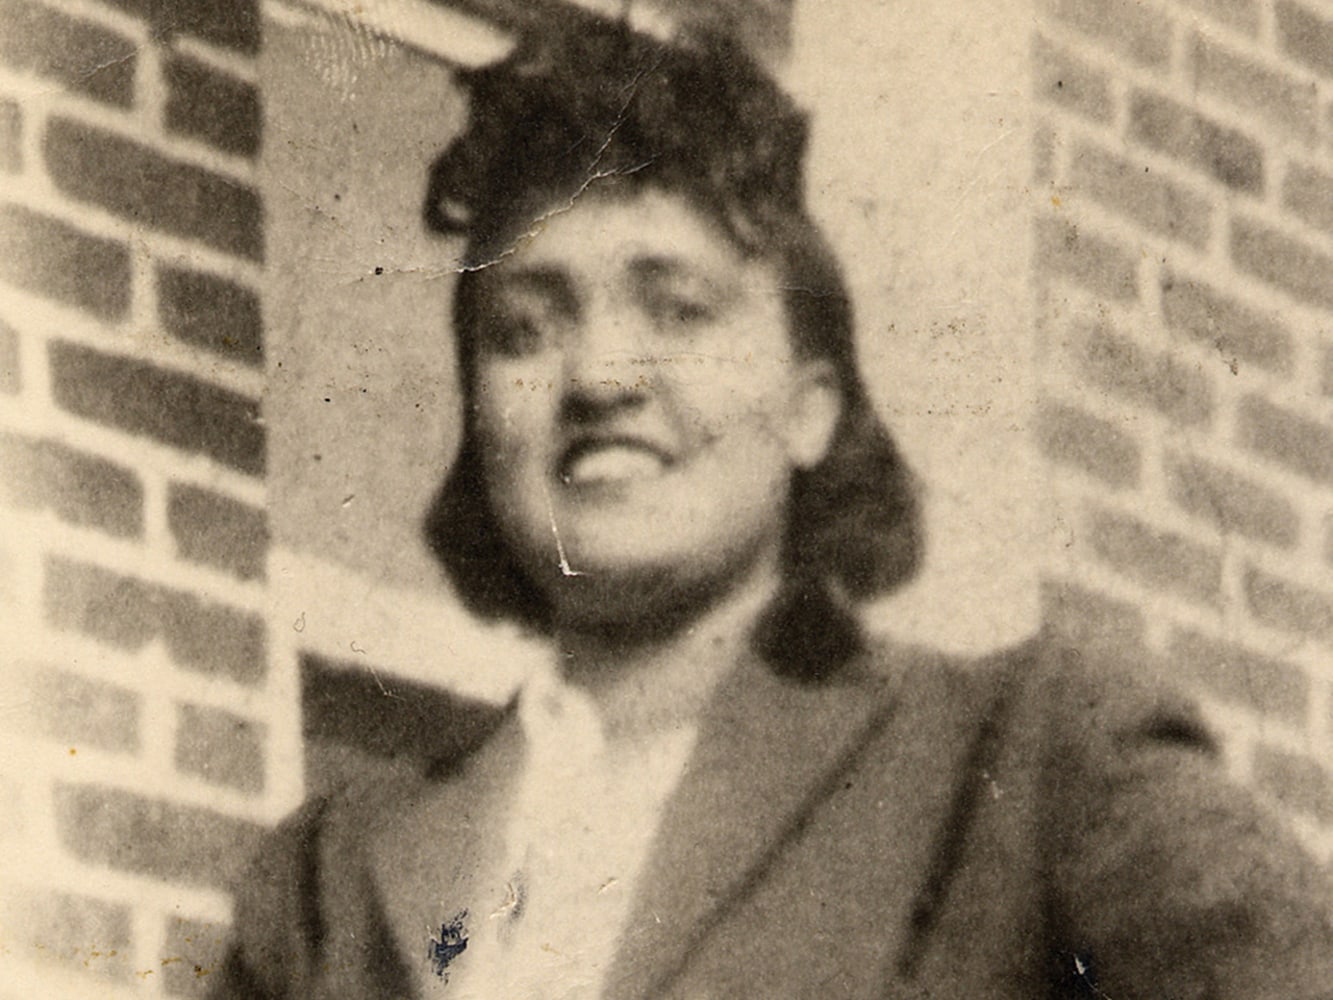 This 1940s photo made available by the family shows Henrietta Lacks In 1951 a